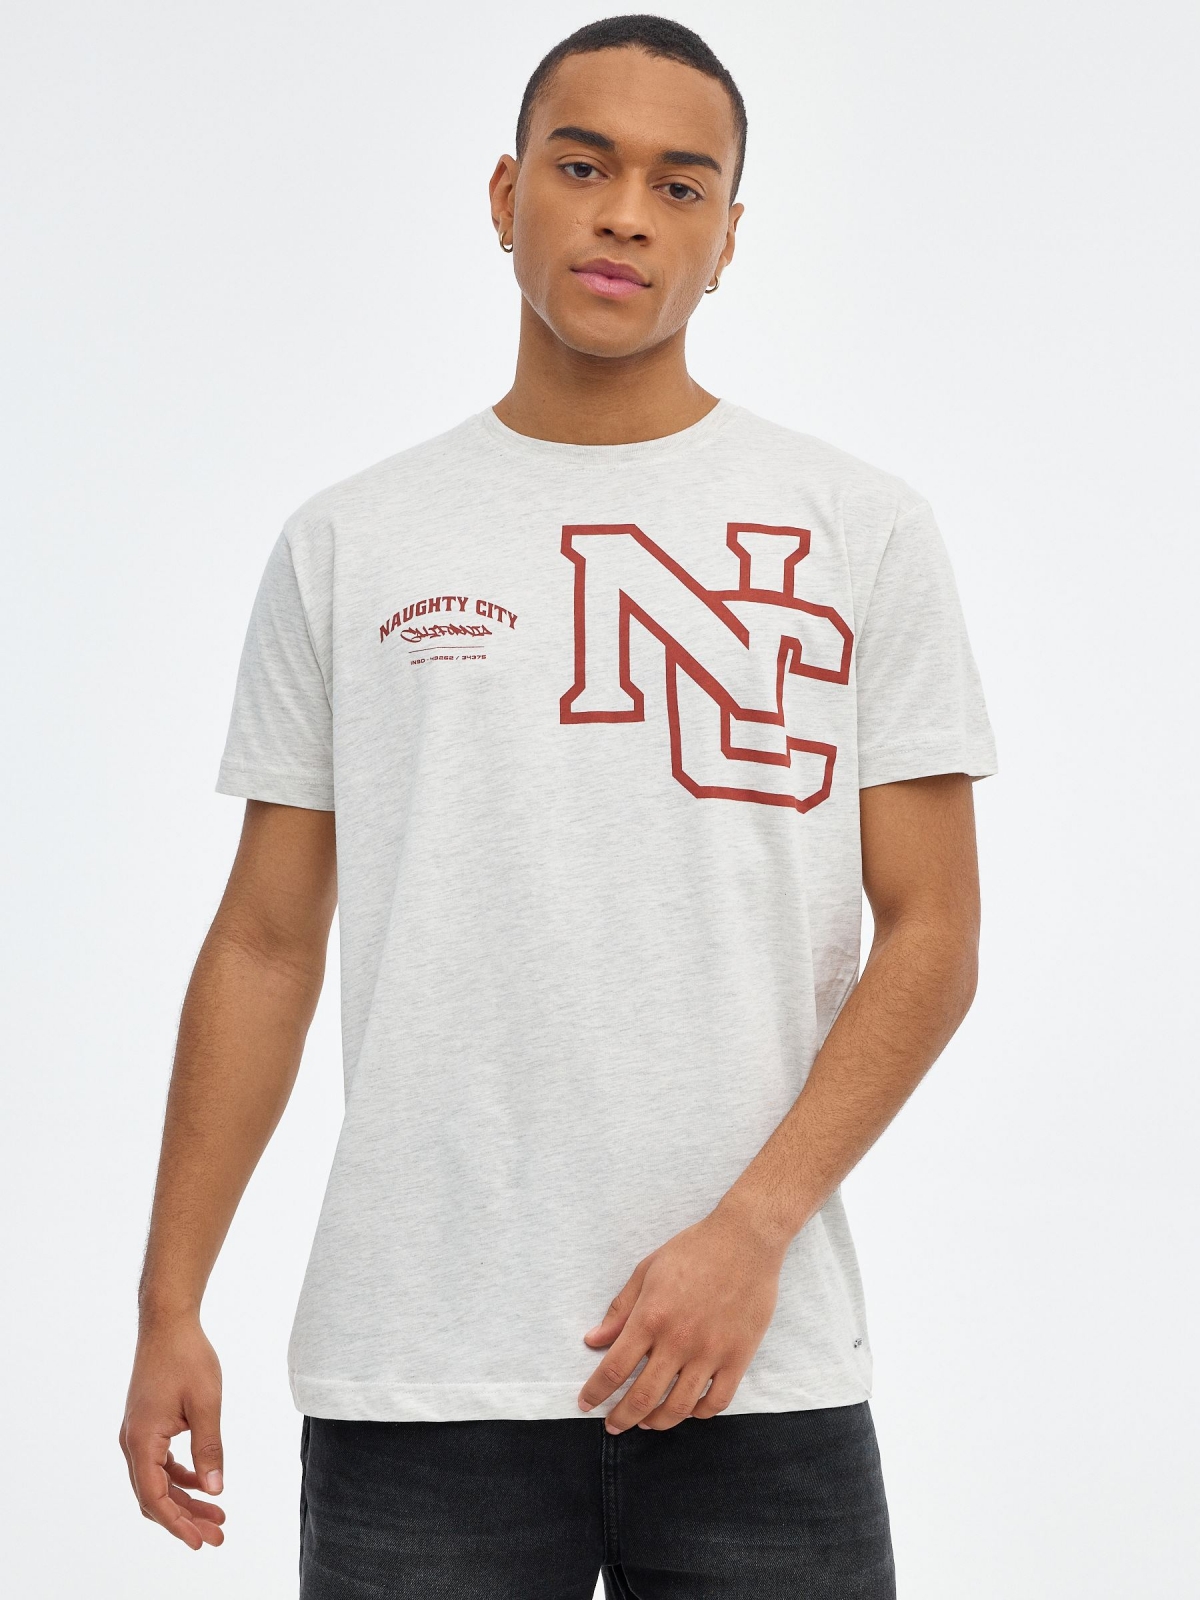 University NC T-shirt grey middle front view